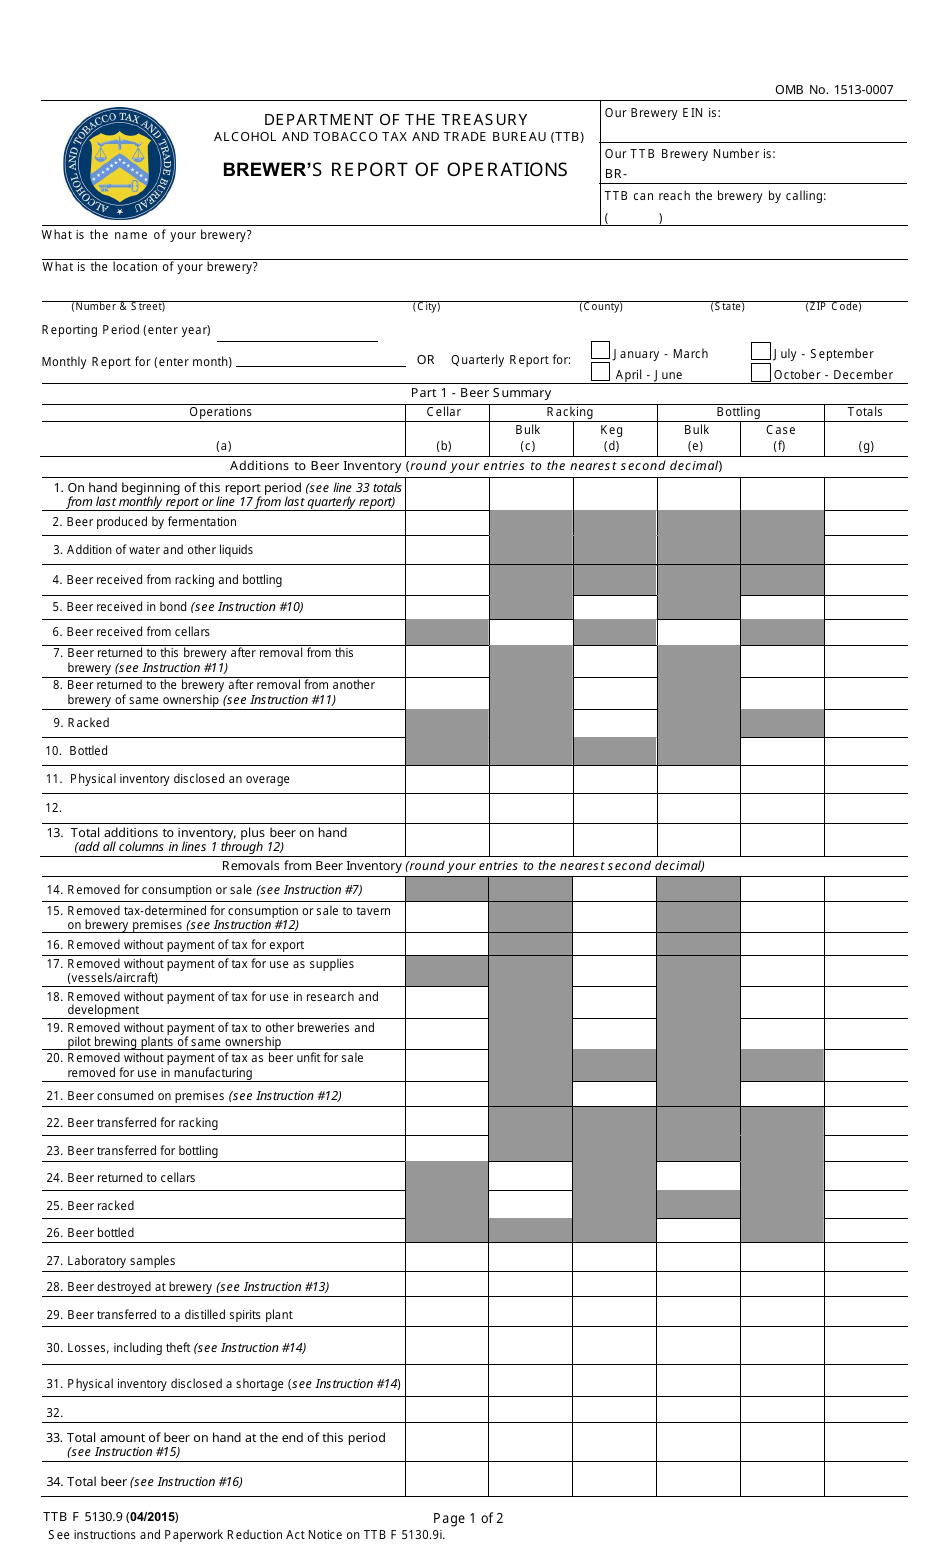 TTB Form 5130.9 Brewers Report of Operations, Page 1